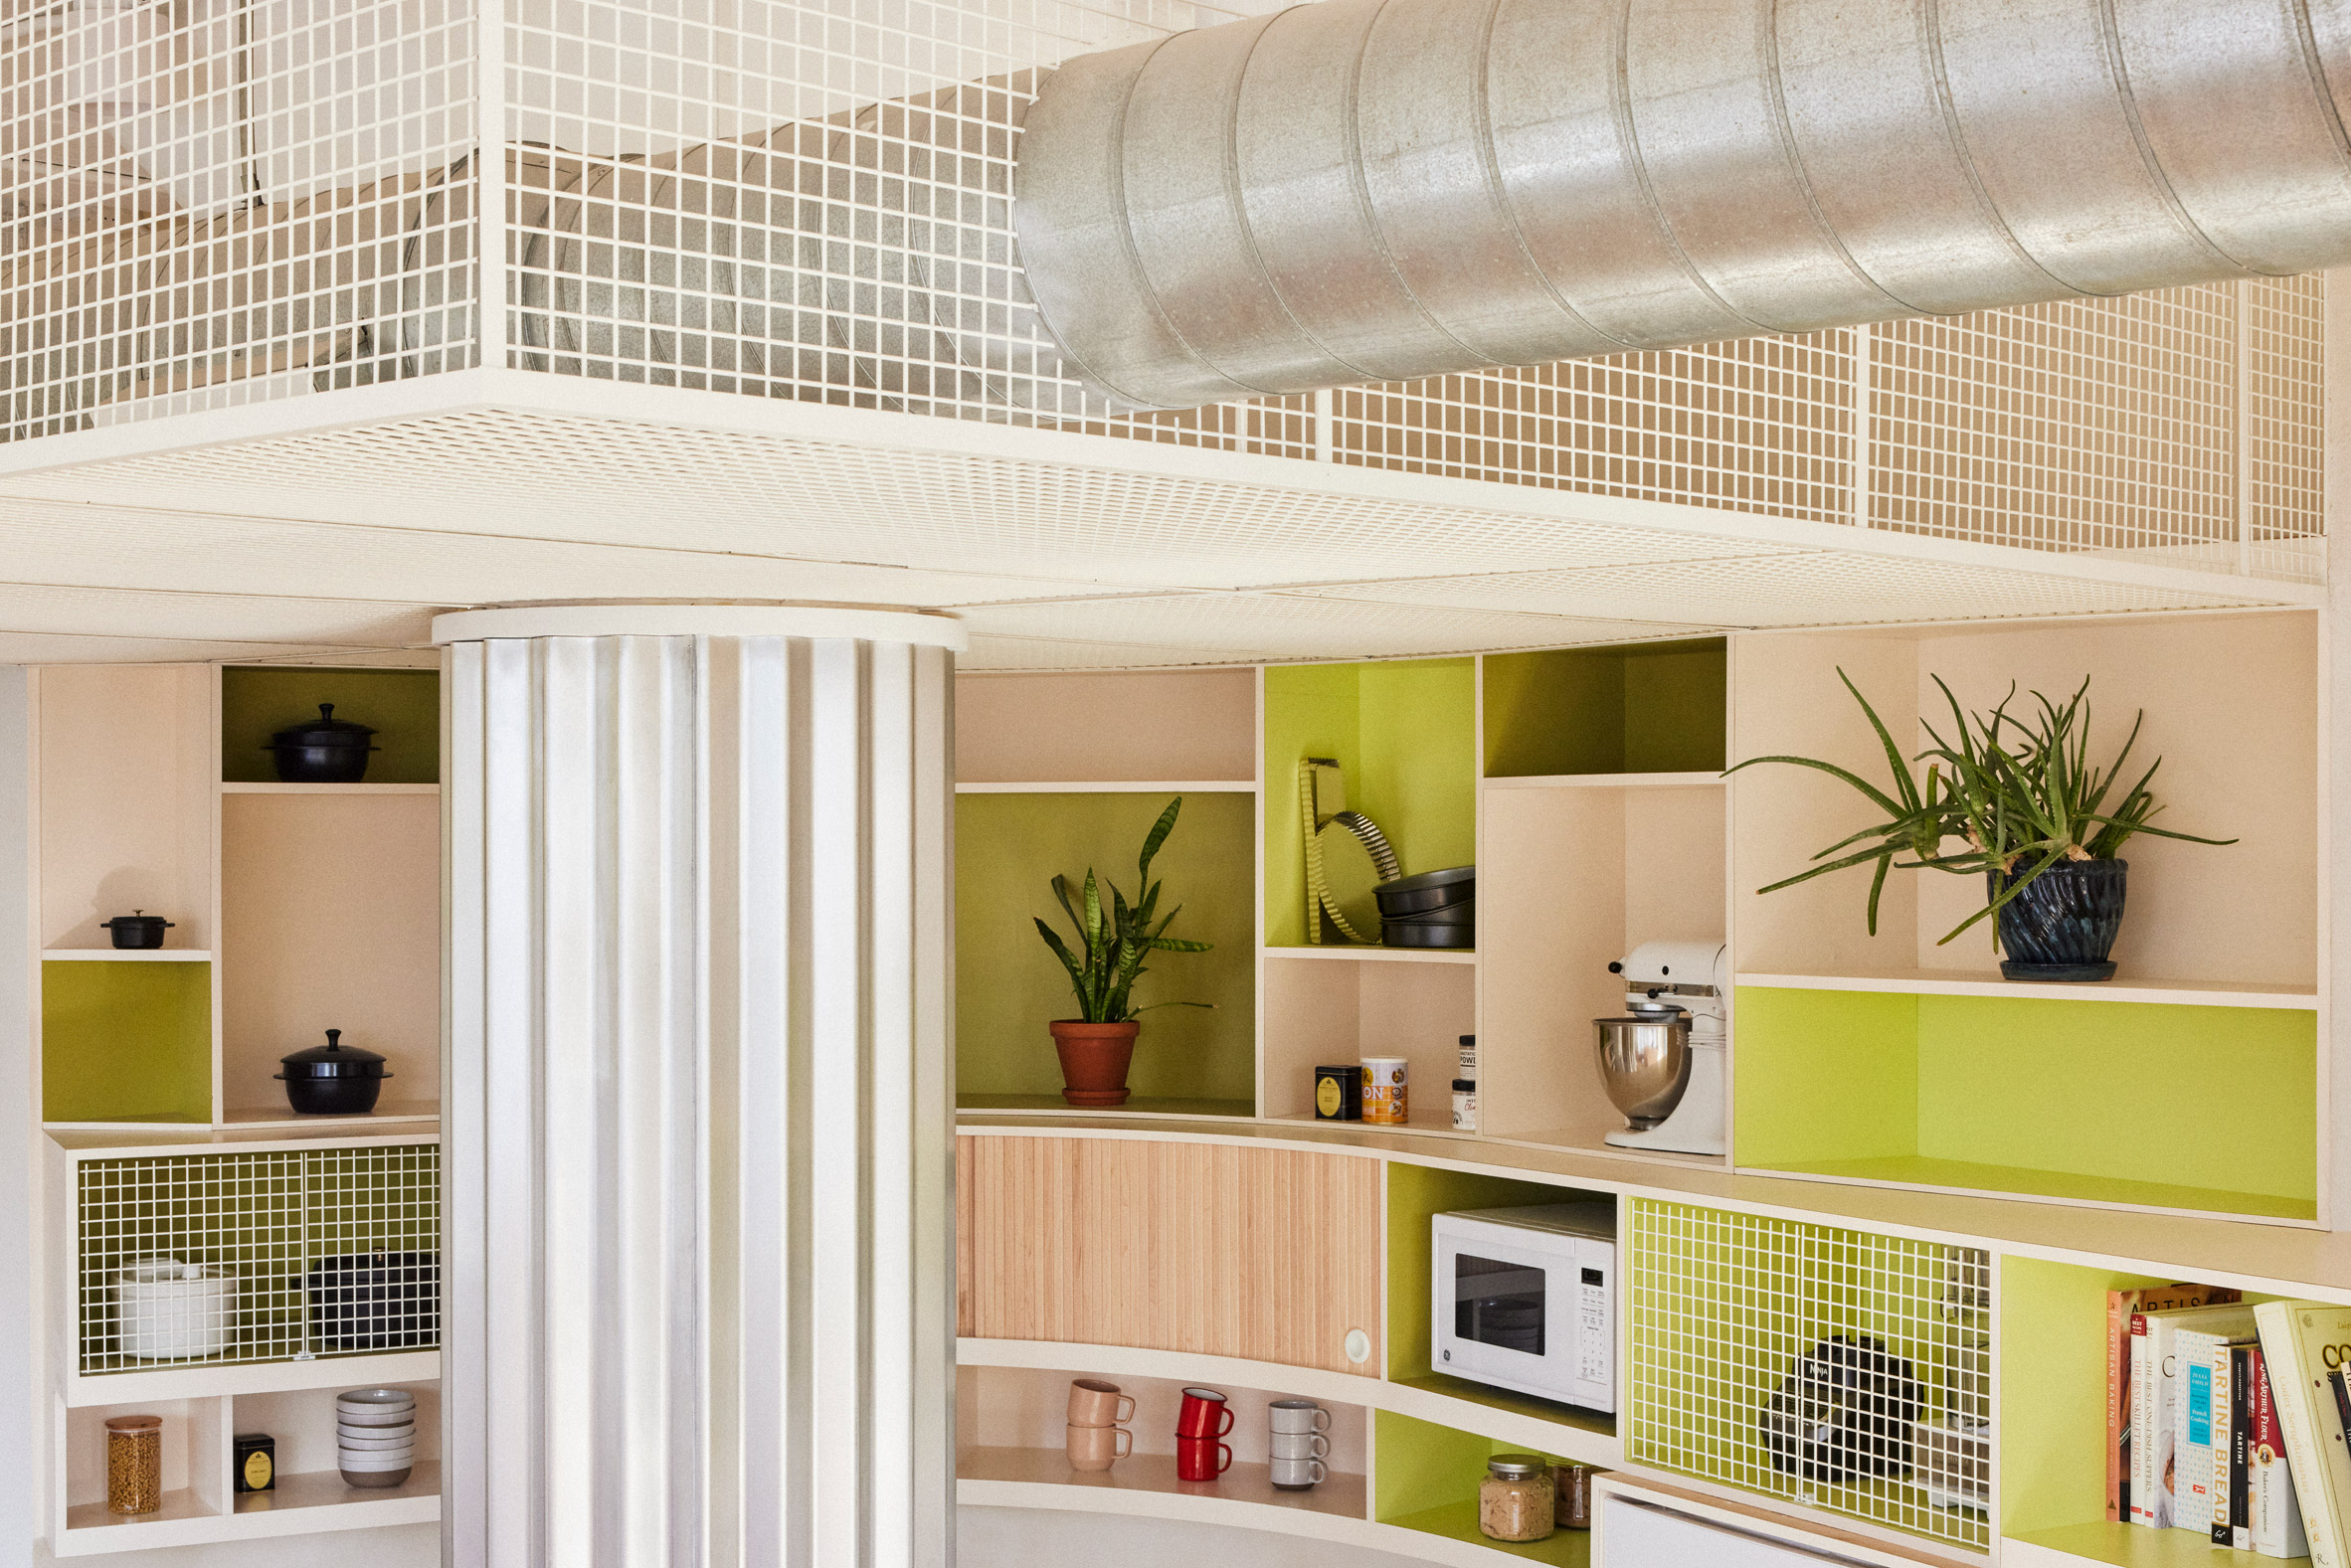 Exposed ductwork and white powder-coated mesh boxes on the kitchen ceiling